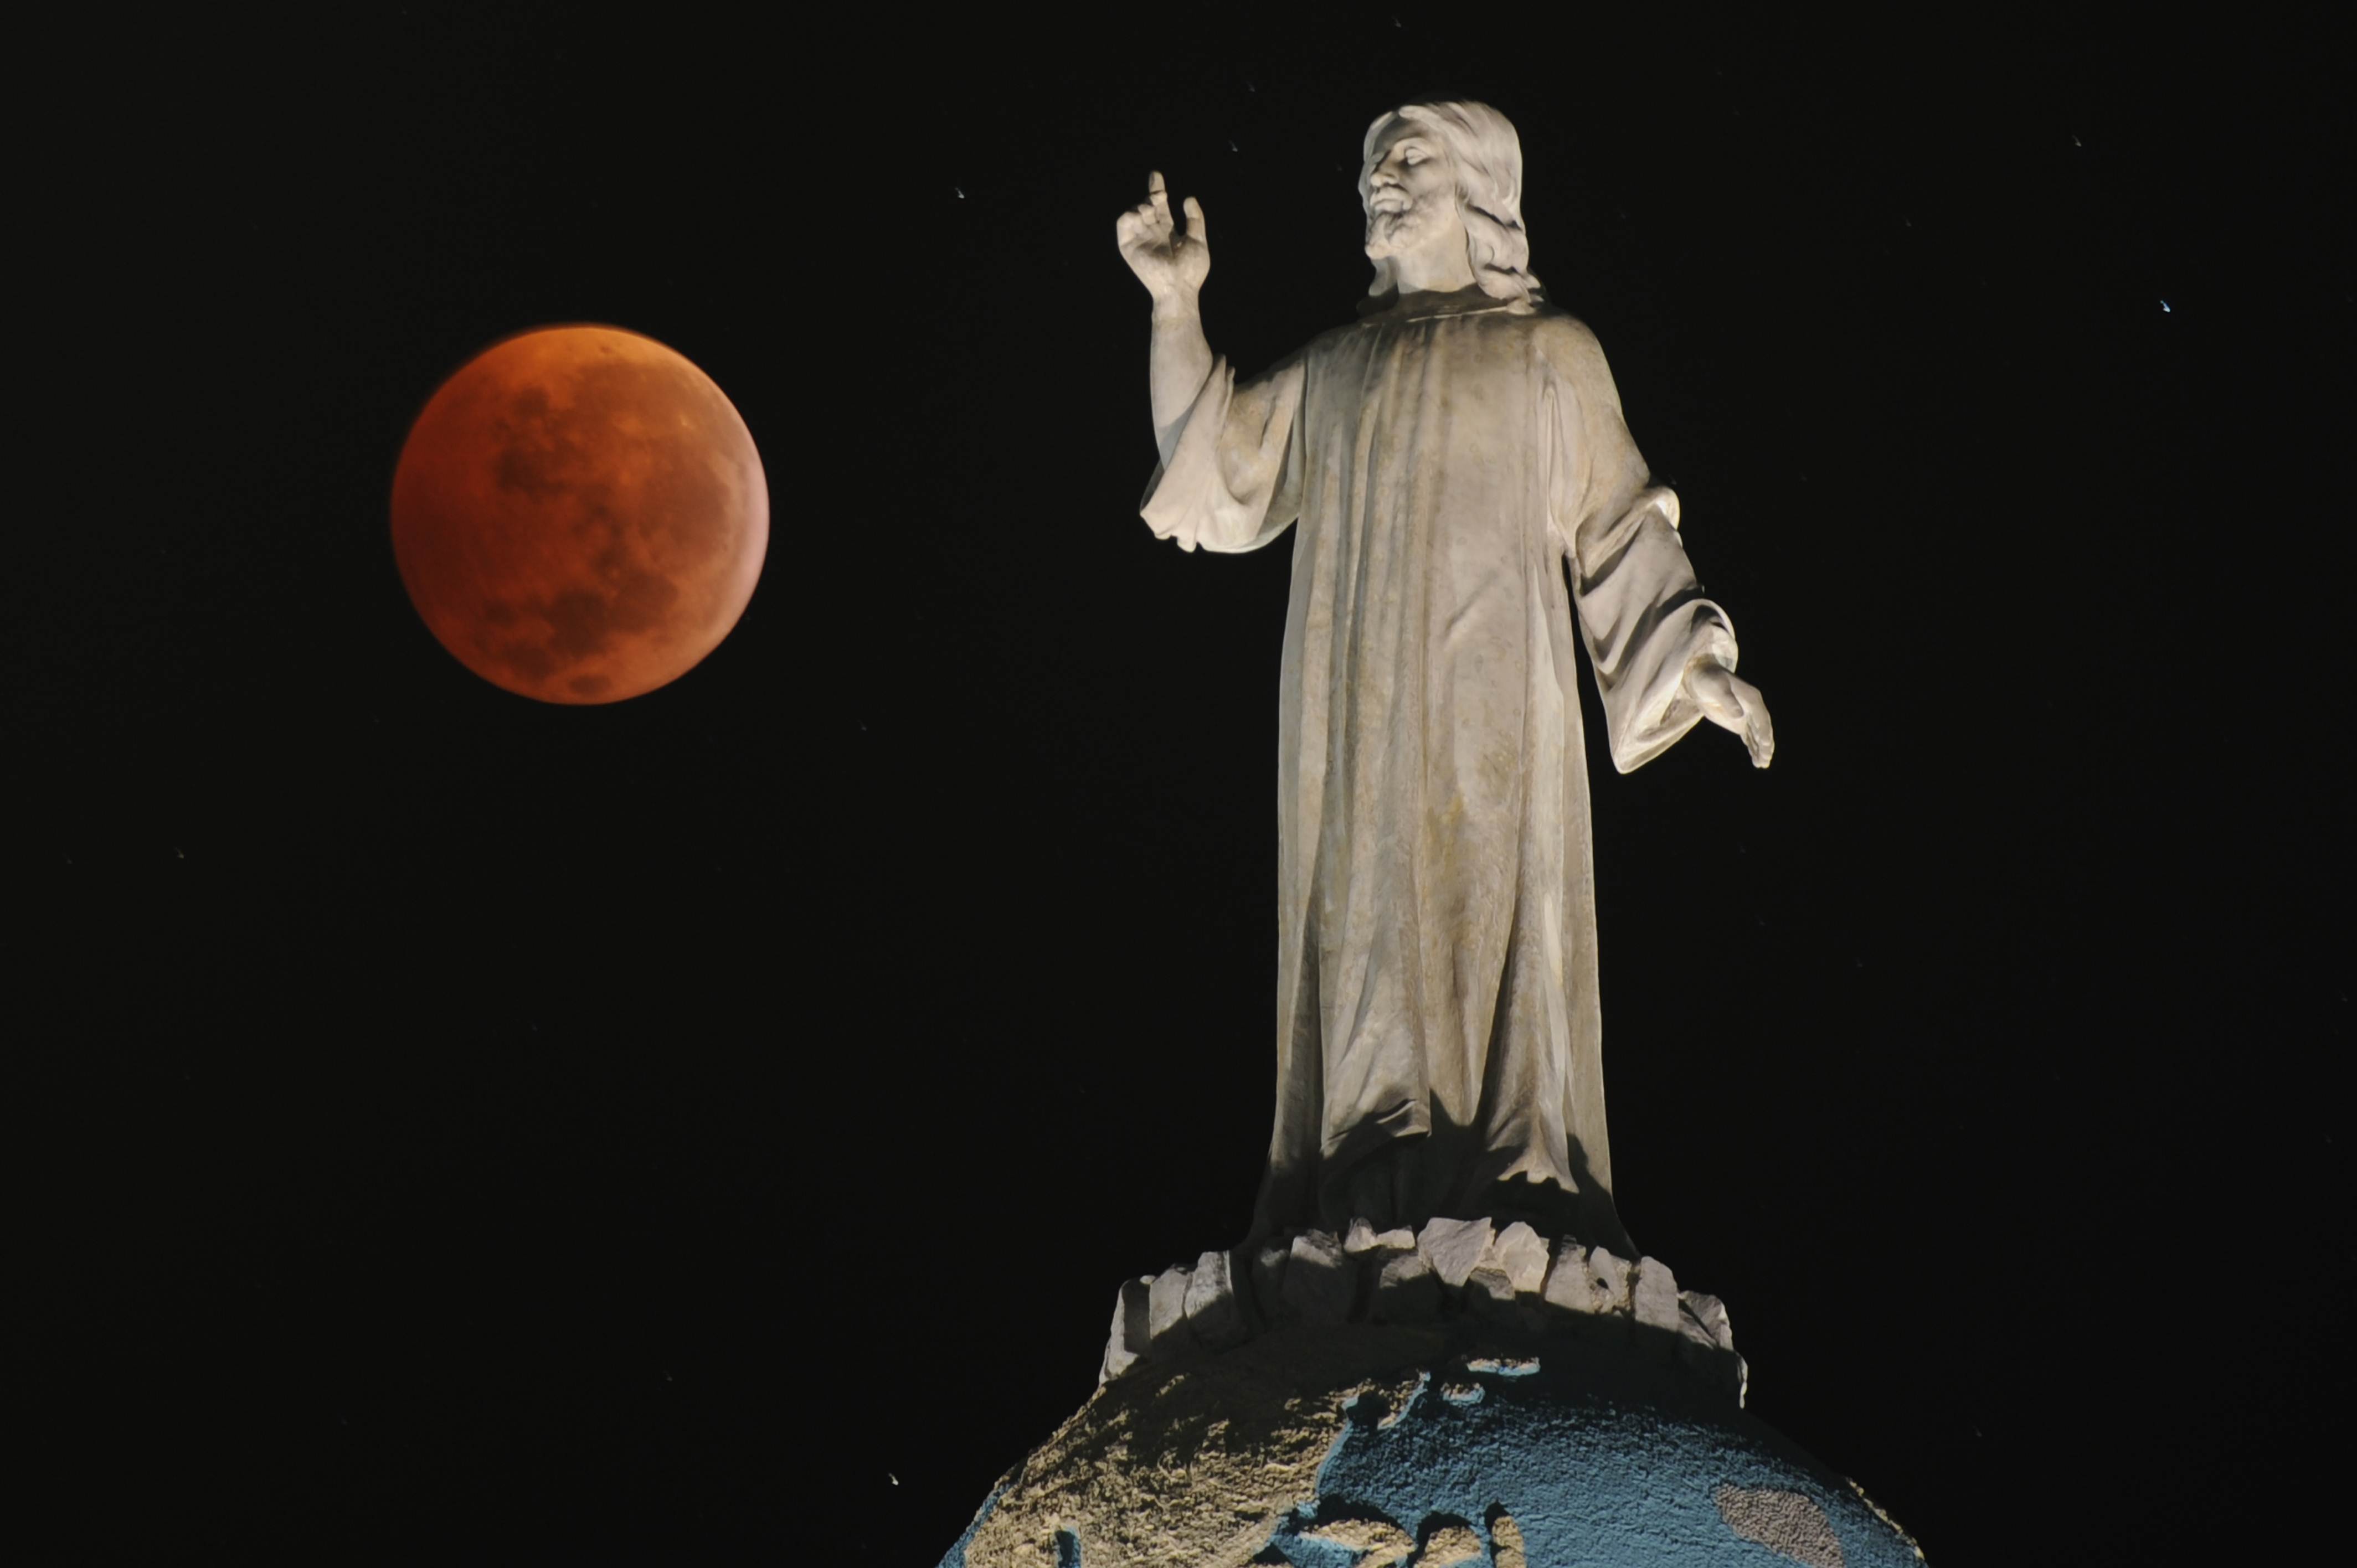 A double exposure picture shows the moon and the monument of The Savior of The World during a total lunar eclipse as seen from San Salvador, El Salvador on December 21, 2010. (Jose Cabezas—AFP/Getty Images)